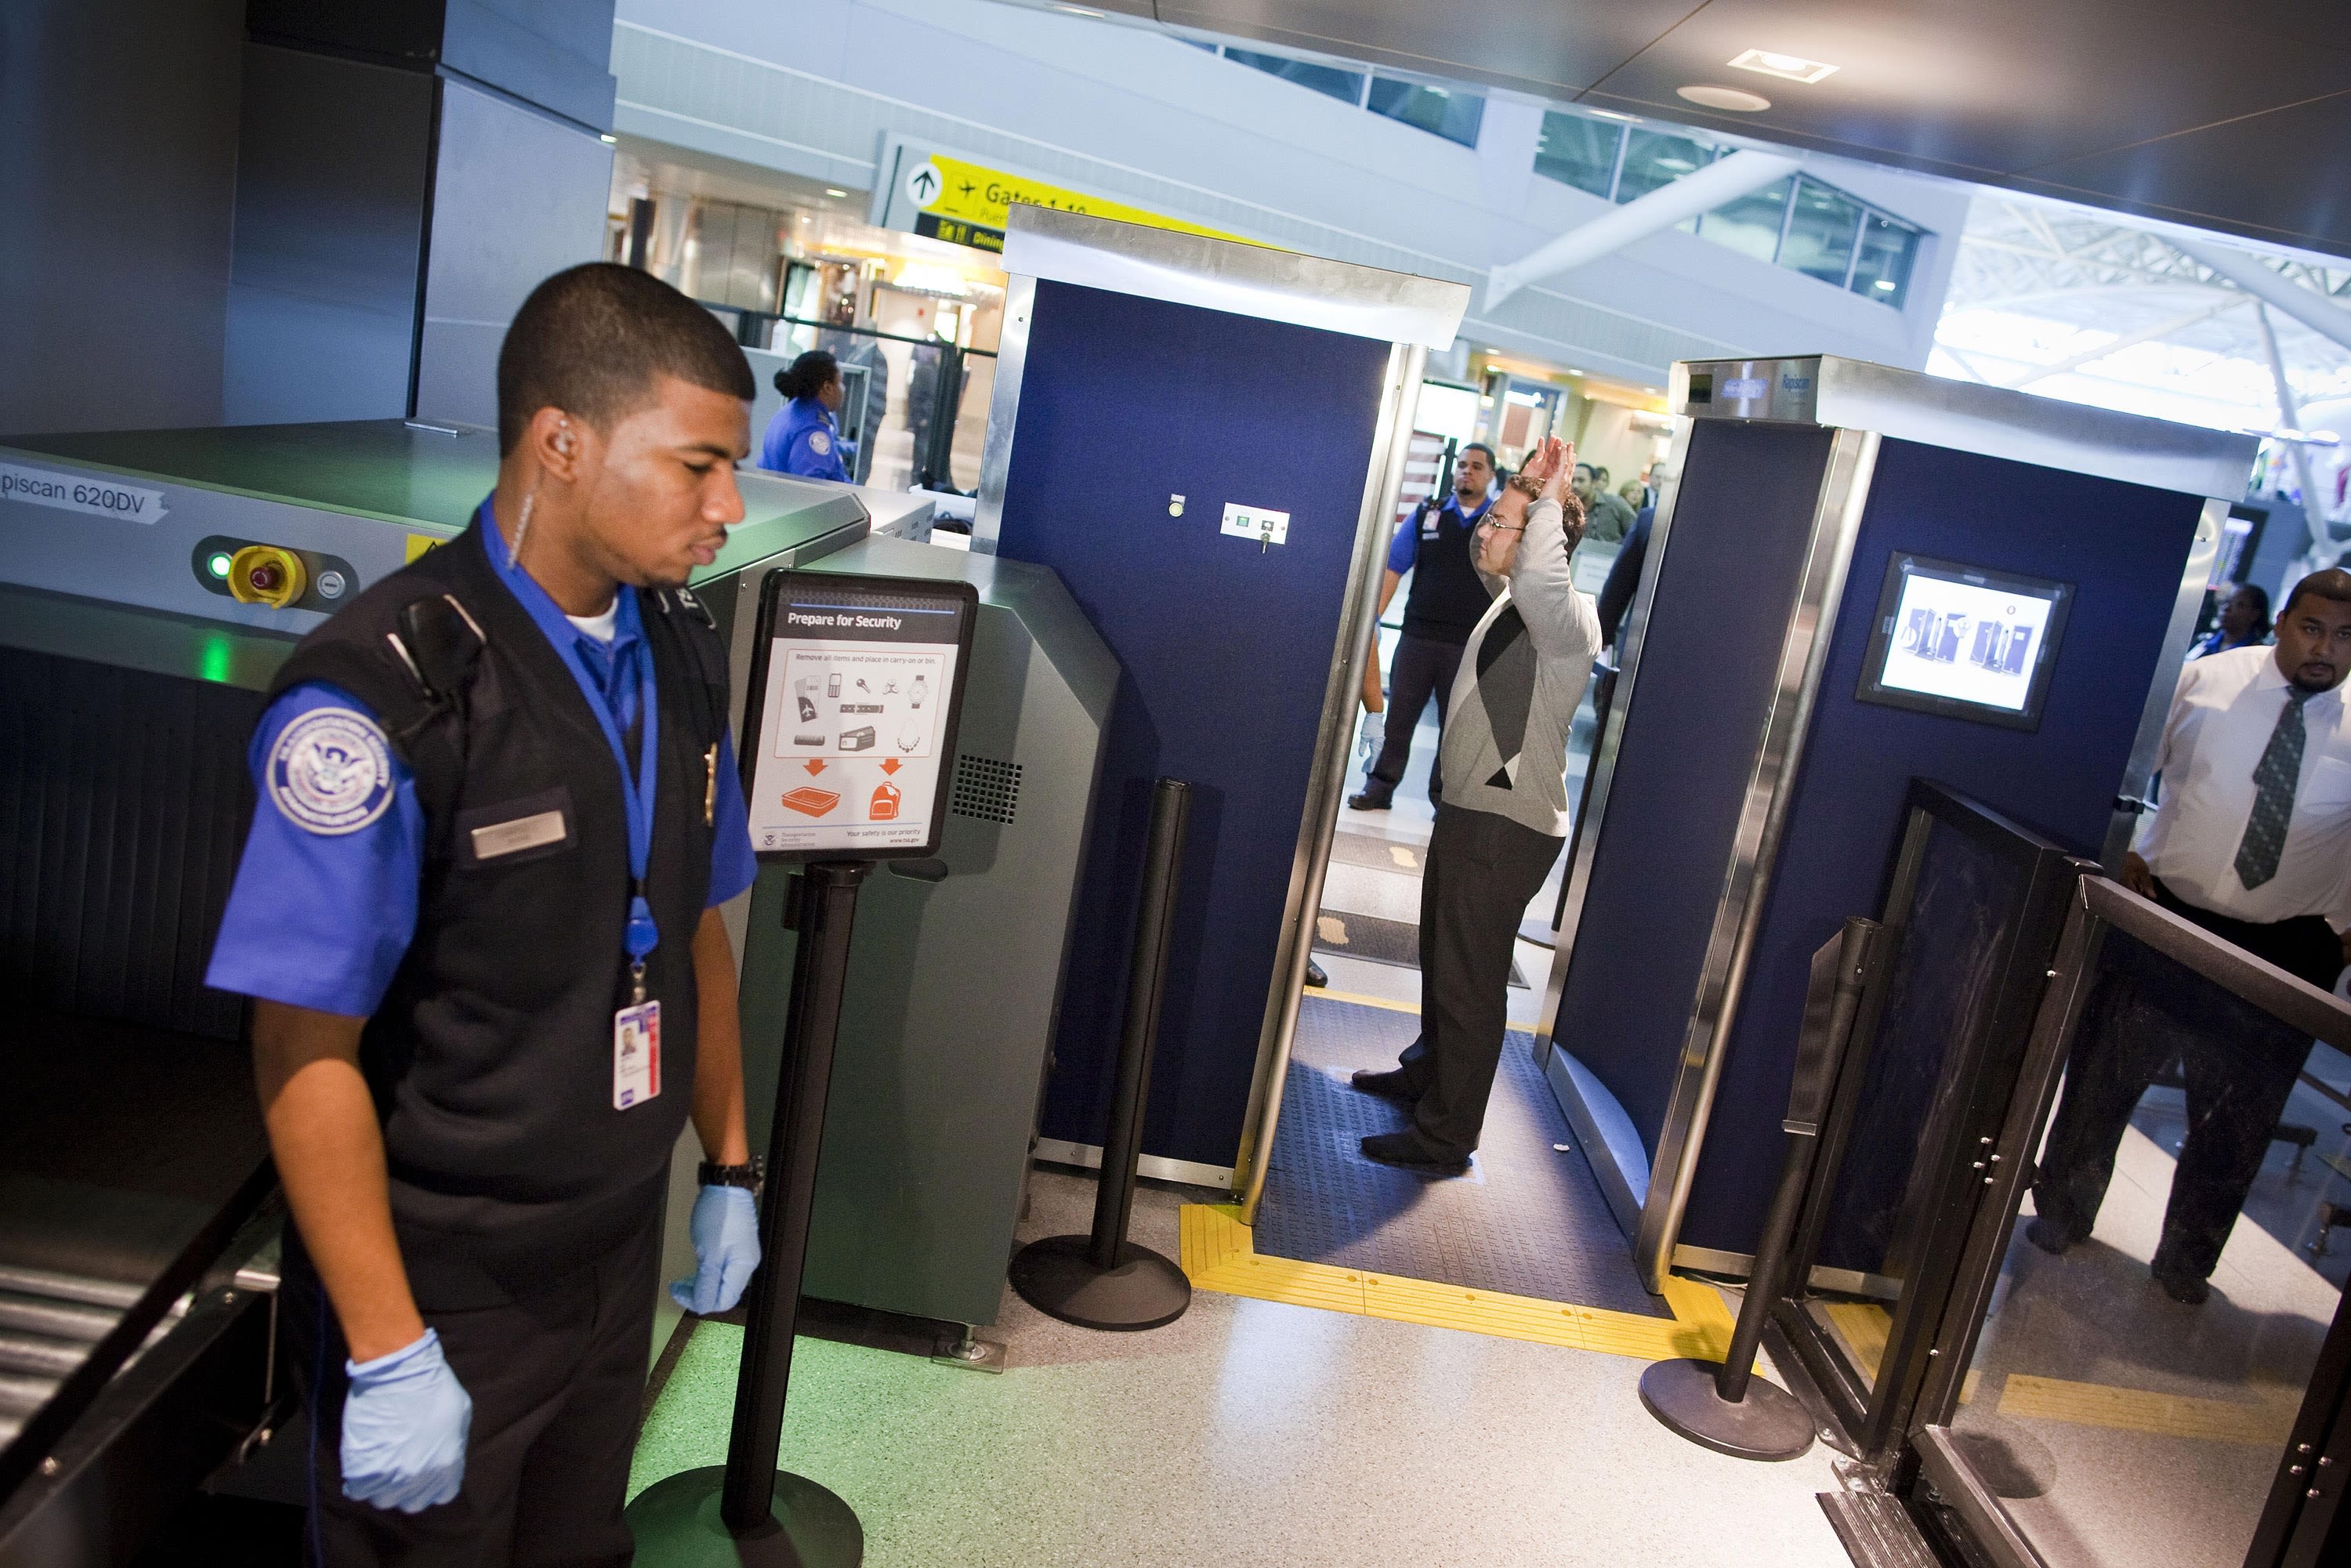 All You Need To Know About Airport Body Scanners - eDreams